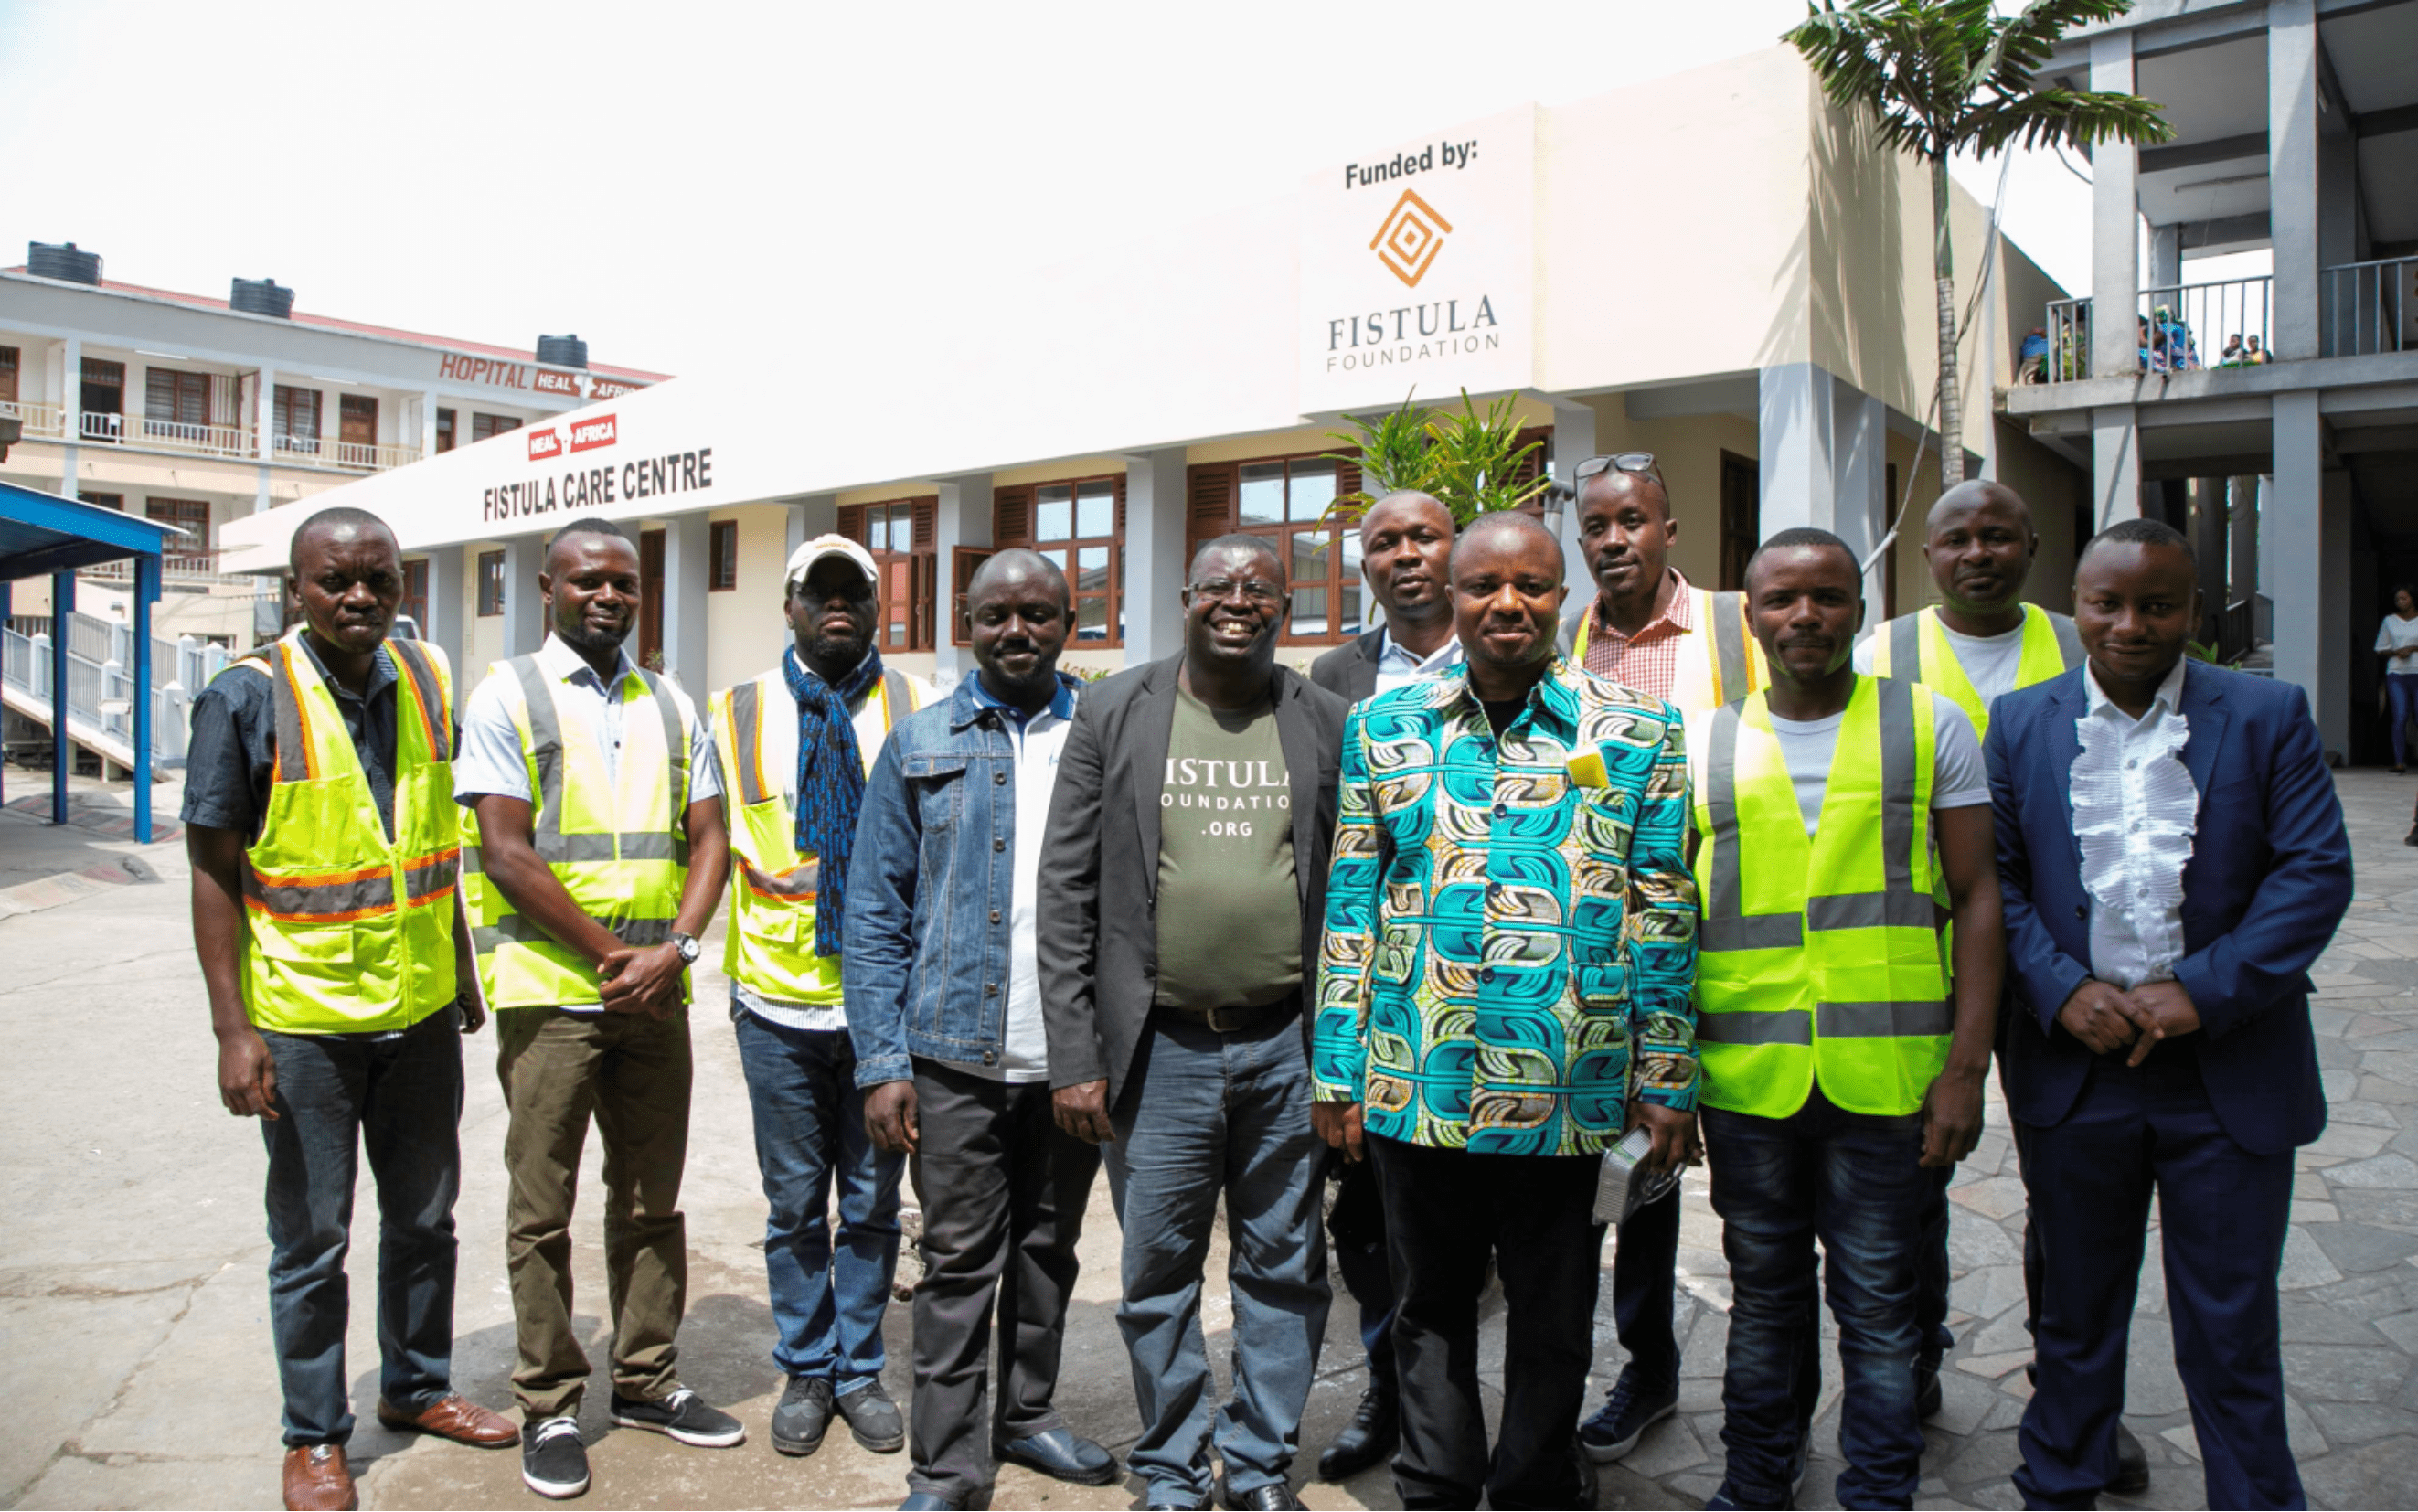 Construstion crew in front of newly built fistula ward